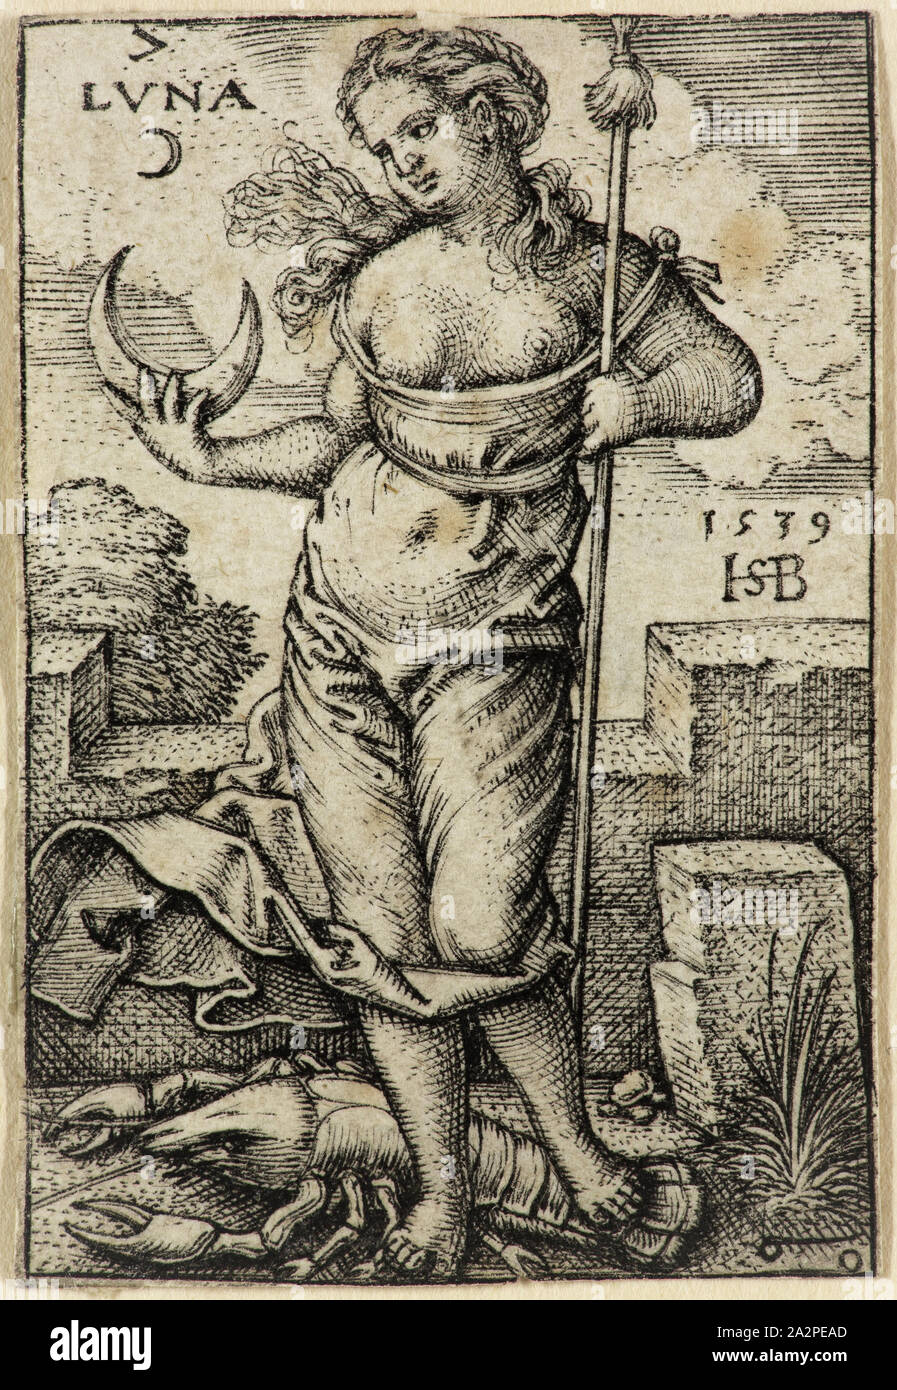 Hans Sebald Beham, German, 1500-1550, Luna, ca. 1539, engraving printed in black ink on laid paper, Sheet (trimmed within plate mark): 1 3/4 × 1 1/8 inches (4.4 × 2.9 cm Stock Photo